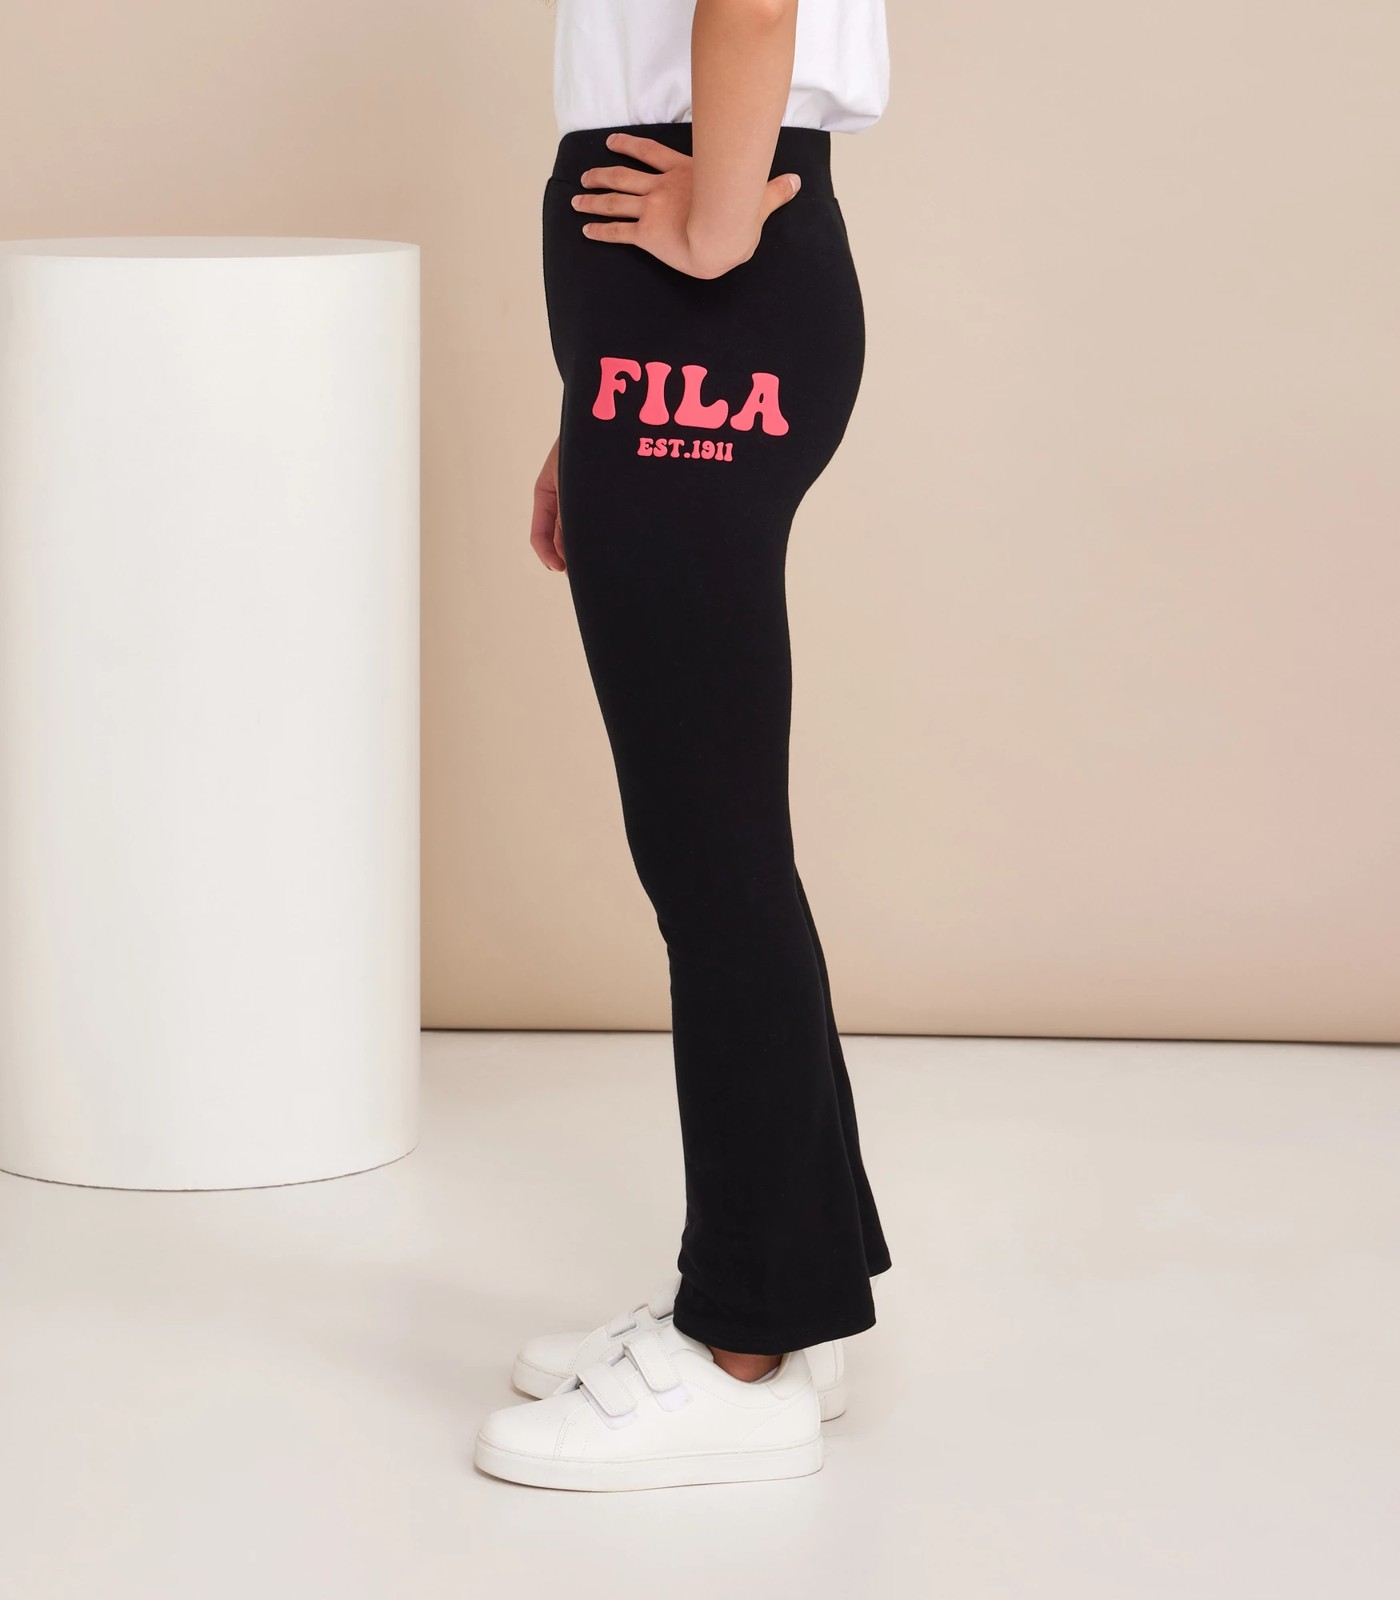 Delilah Flare Pants  Outfits with leggings, Flare pants, Flared pants  outfit